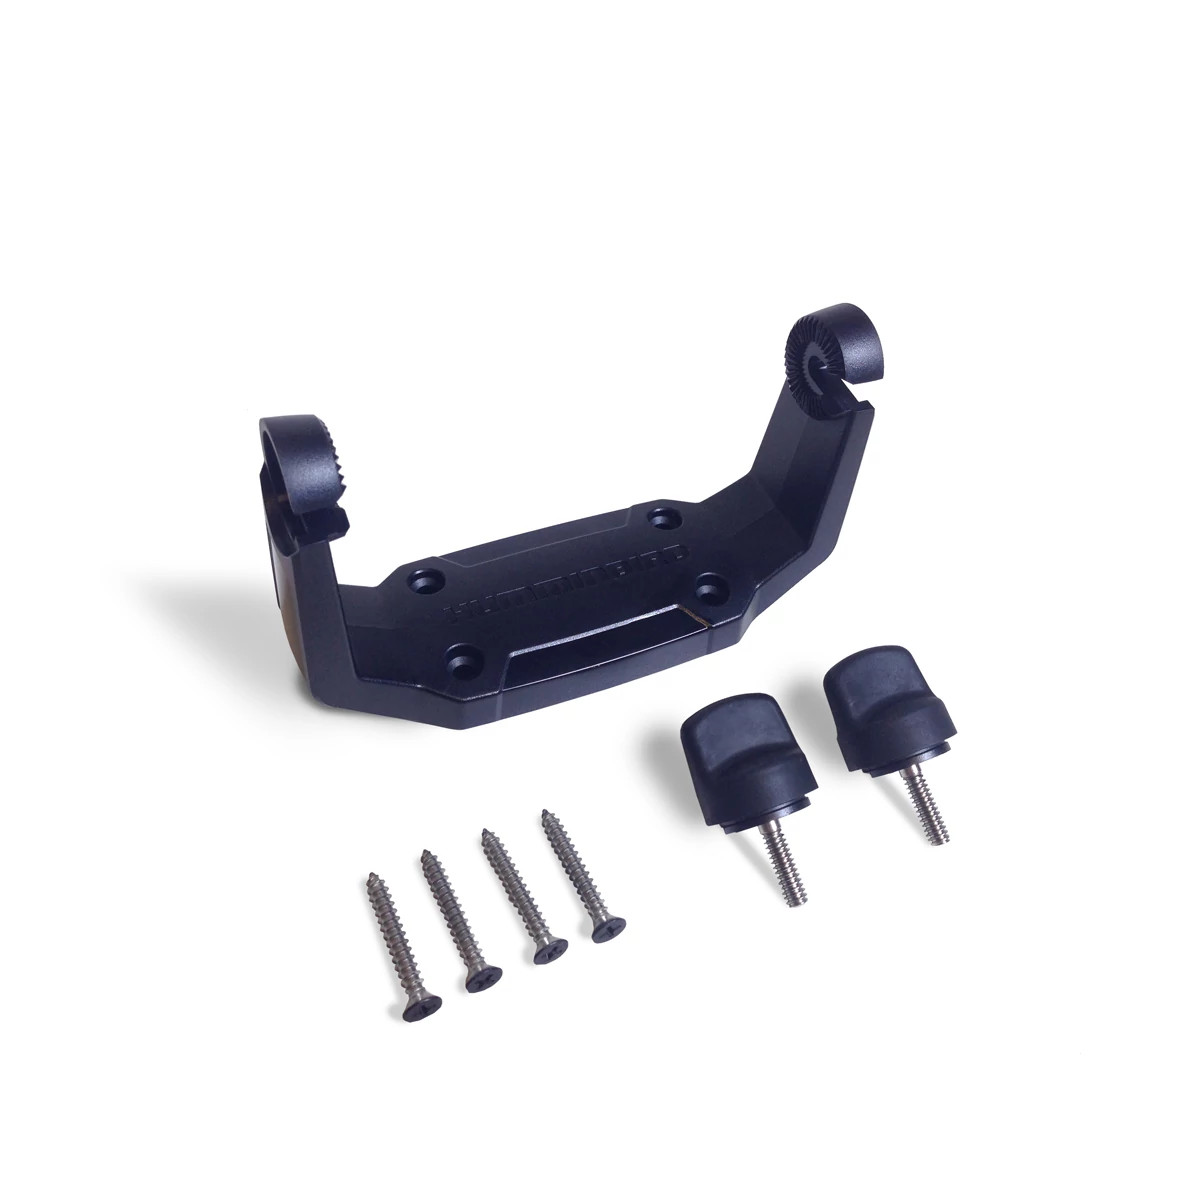 Humminbird IDMK H5 Helix 5 in Dash Mounting Kit for sale online 